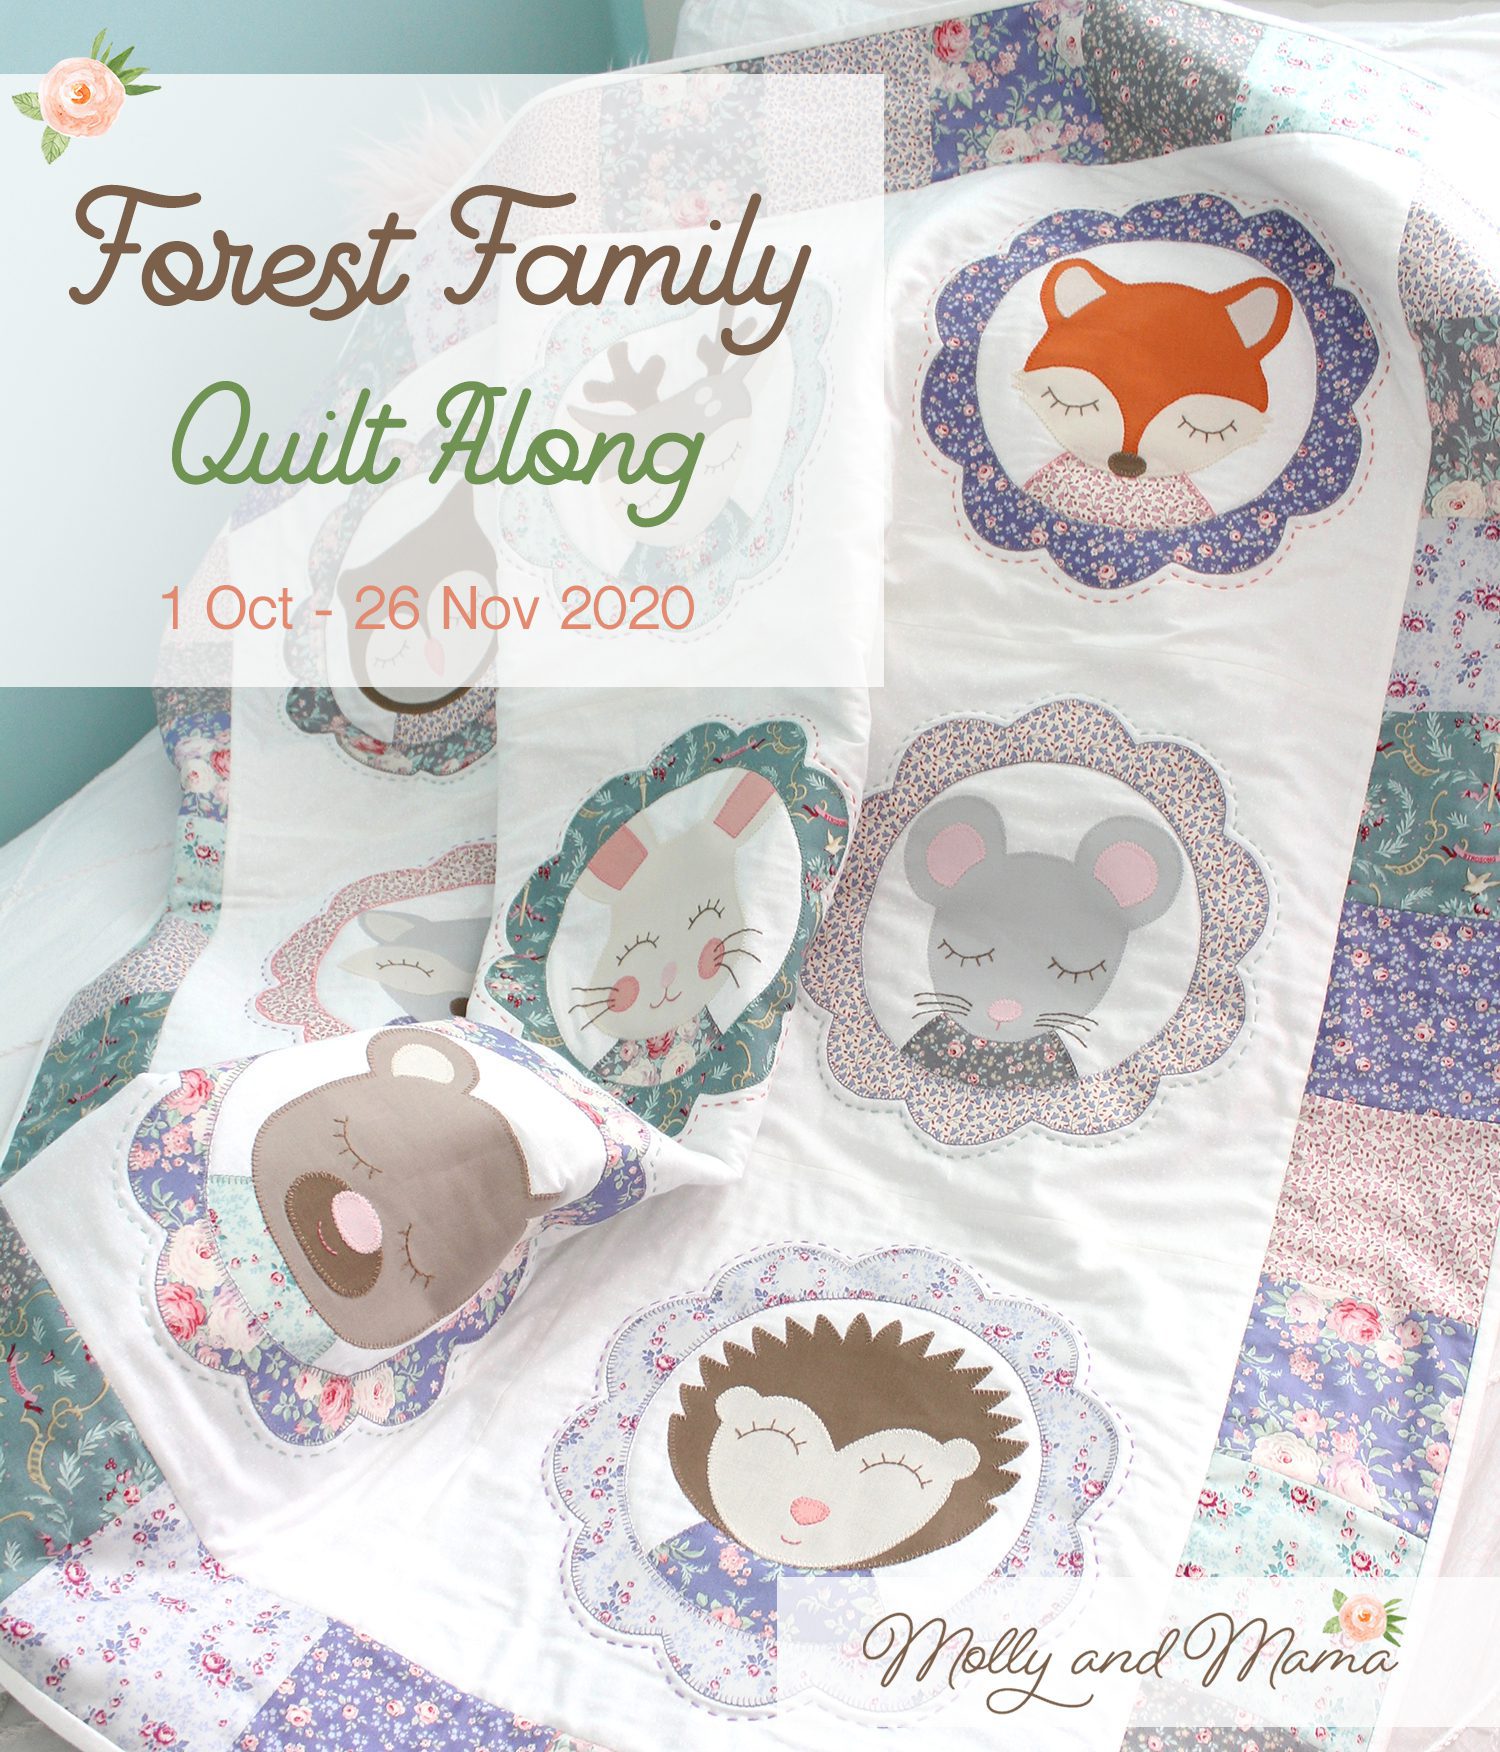 Welcome to the Forest Family Quilt Along